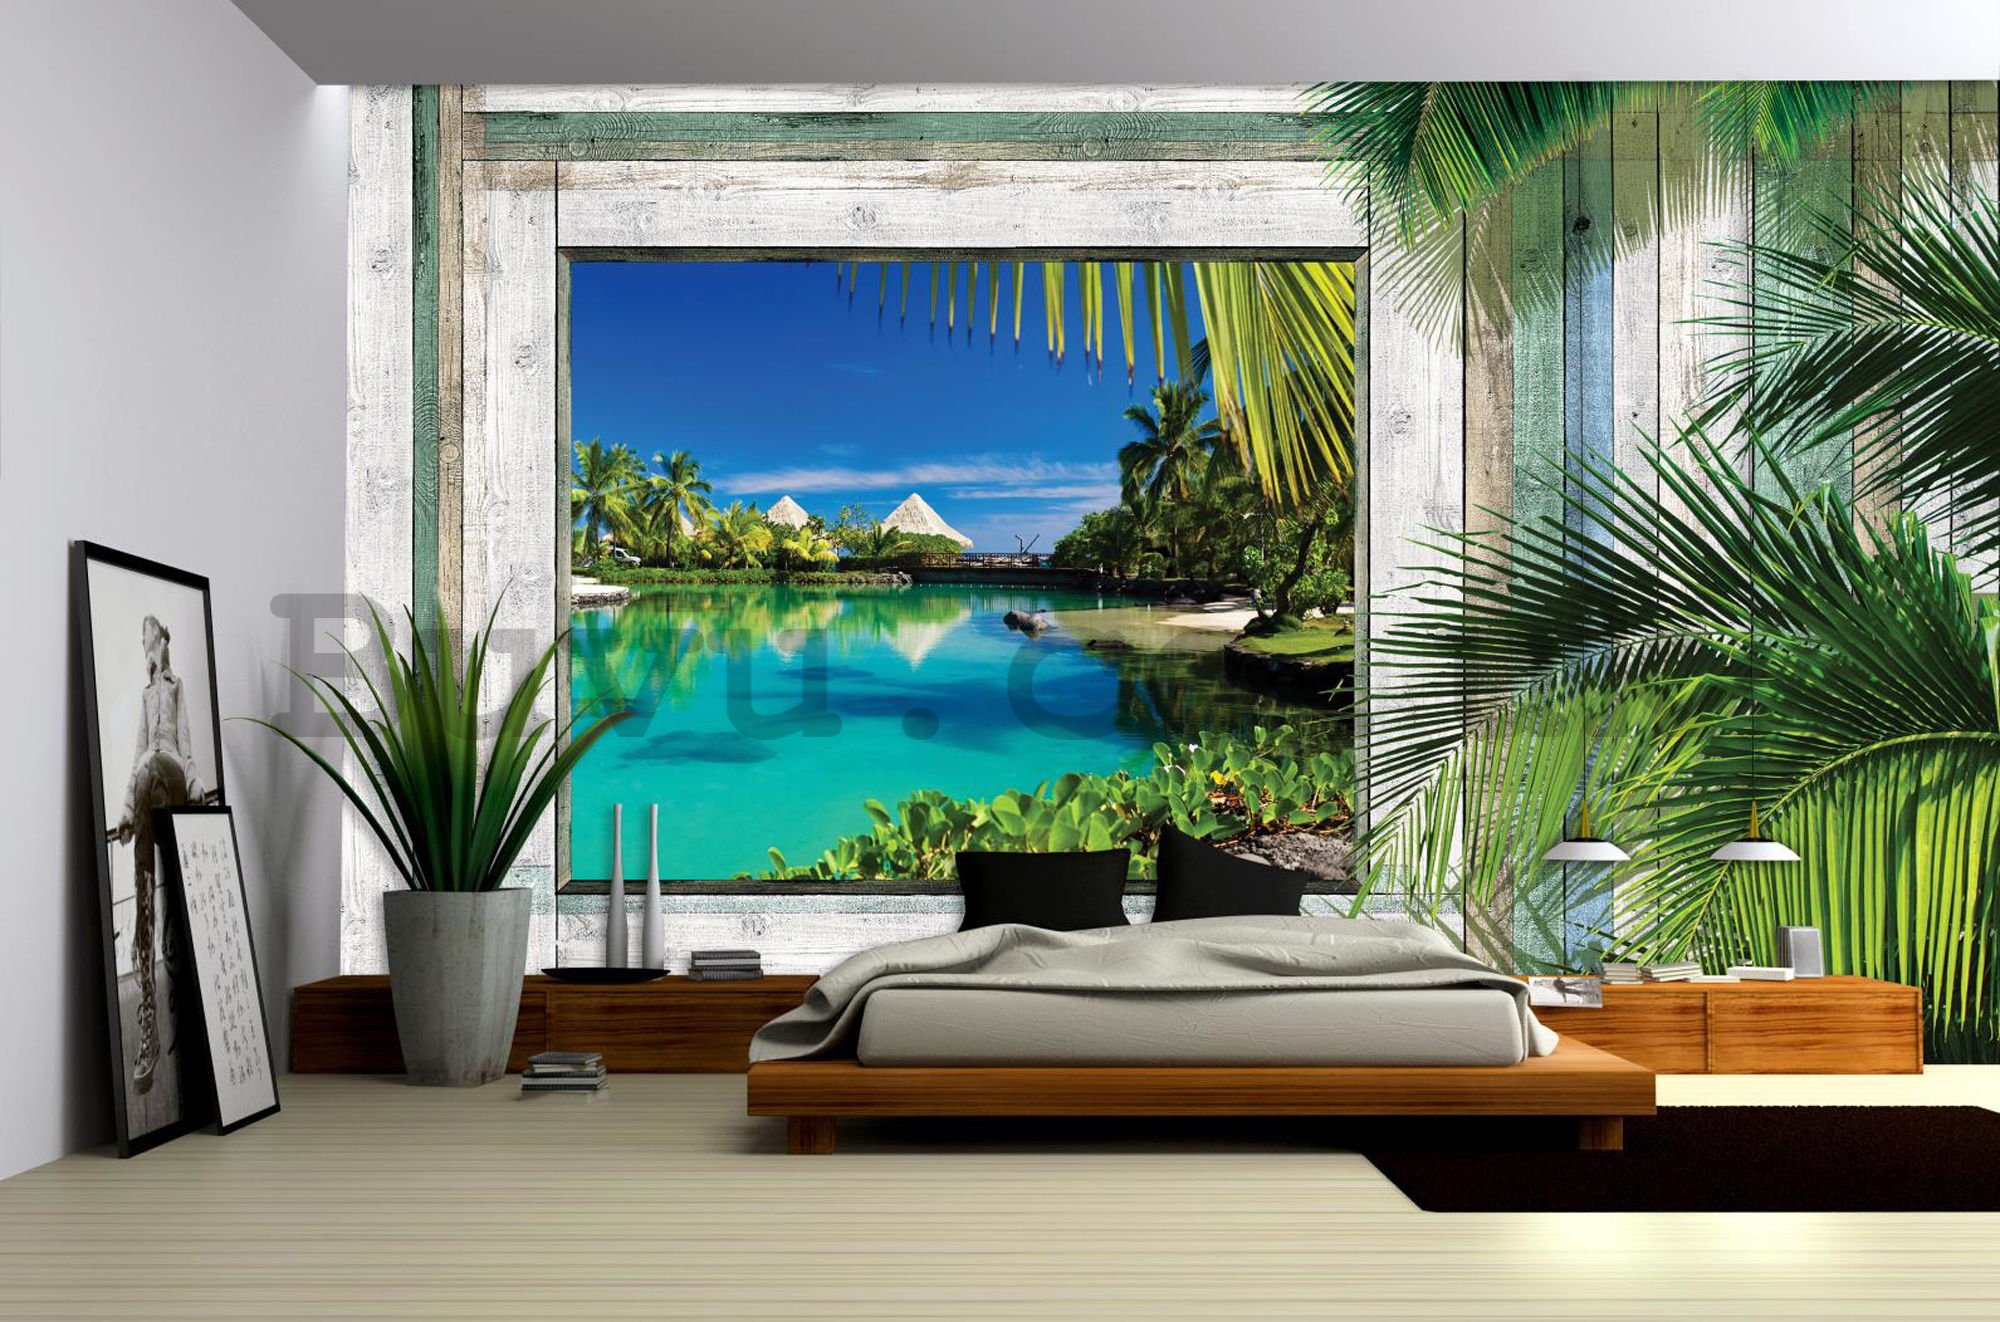 Wall Mural: Window to paradise (1) - 254x368 cm